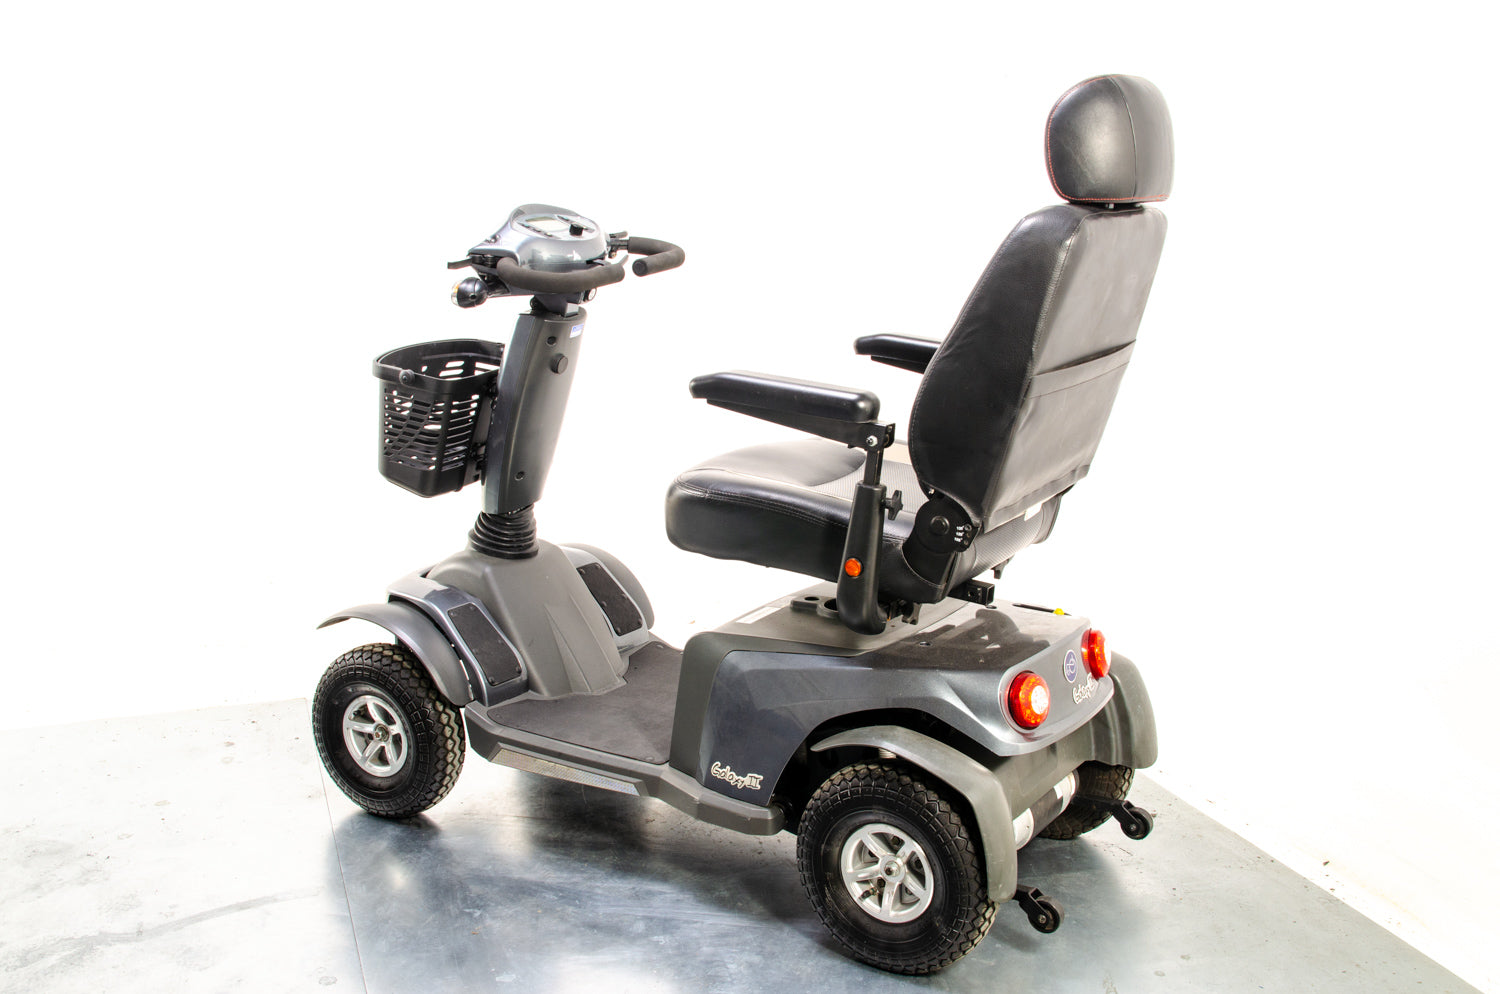 Excel Galaxy II All-Terrain Off-Road Used Mobility Scooter 8mph Van Os Large Comfy Class 3 Road Legal 13381